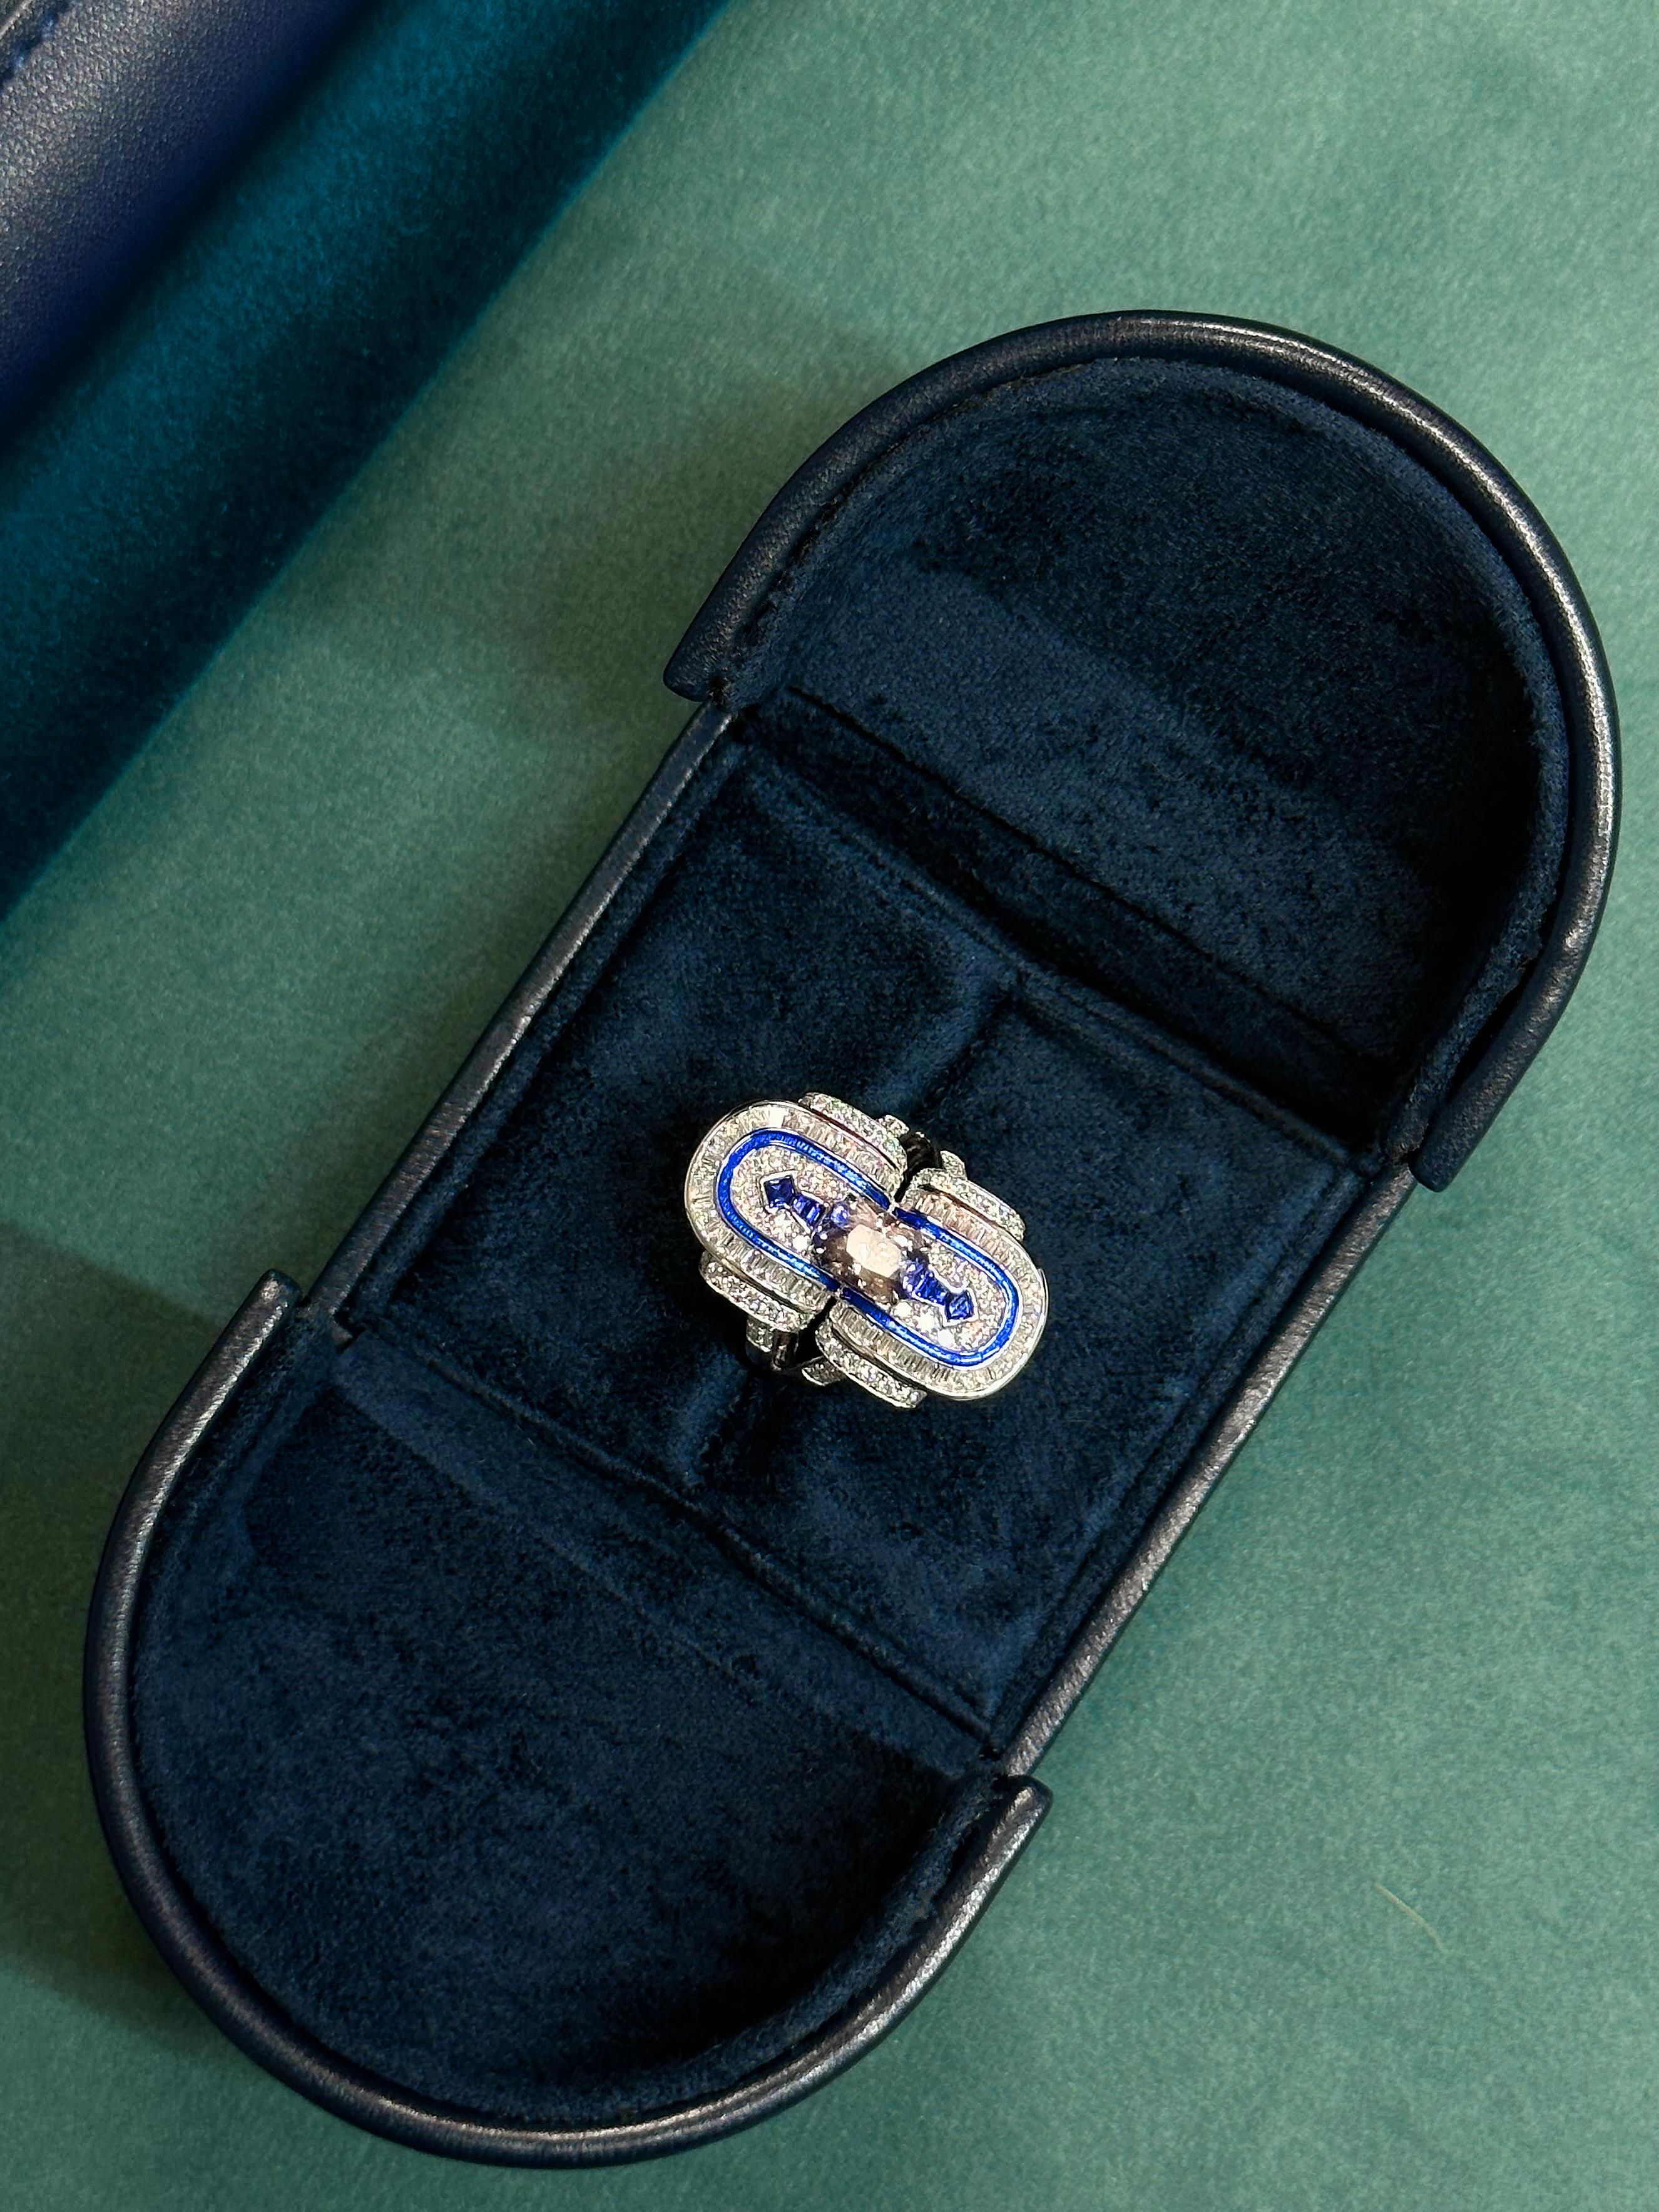 Made To Order starting from $5,000! Choose your gemstone to customize your ring 

The chic geometric design glitters with vibrant diamonds and is punctuated by rich blue lines of meticulously custom-cut sapphires and blue enamel. 

This outstanding